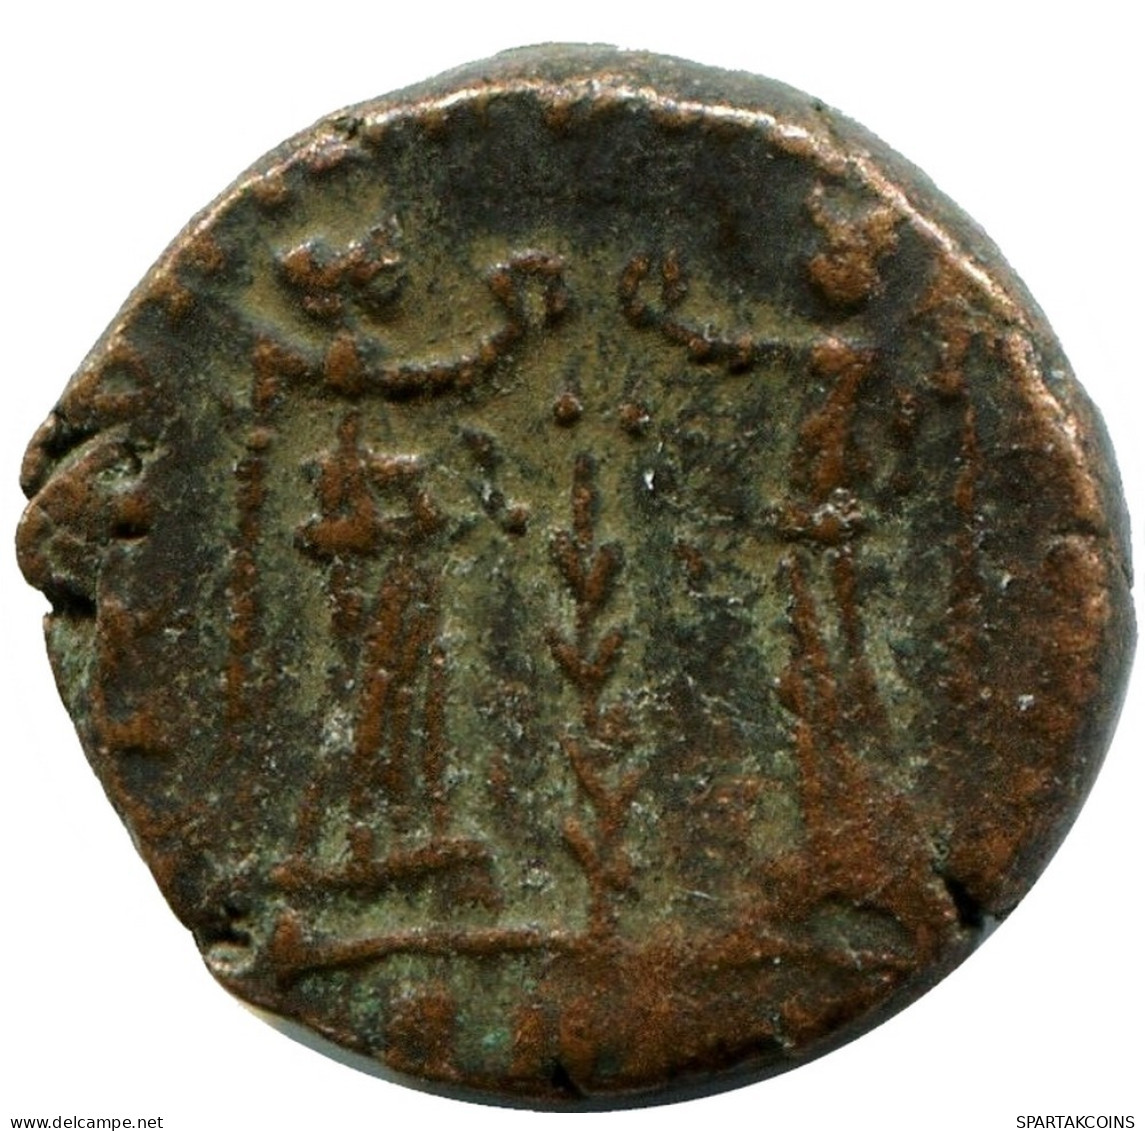 CONSTANS MINTED IN ROME ITALY FROM THE ROYAL ONTARIO MUSEUM #ANC11503.14.U.A - The Christian Empire (307 AD To 363 AD)